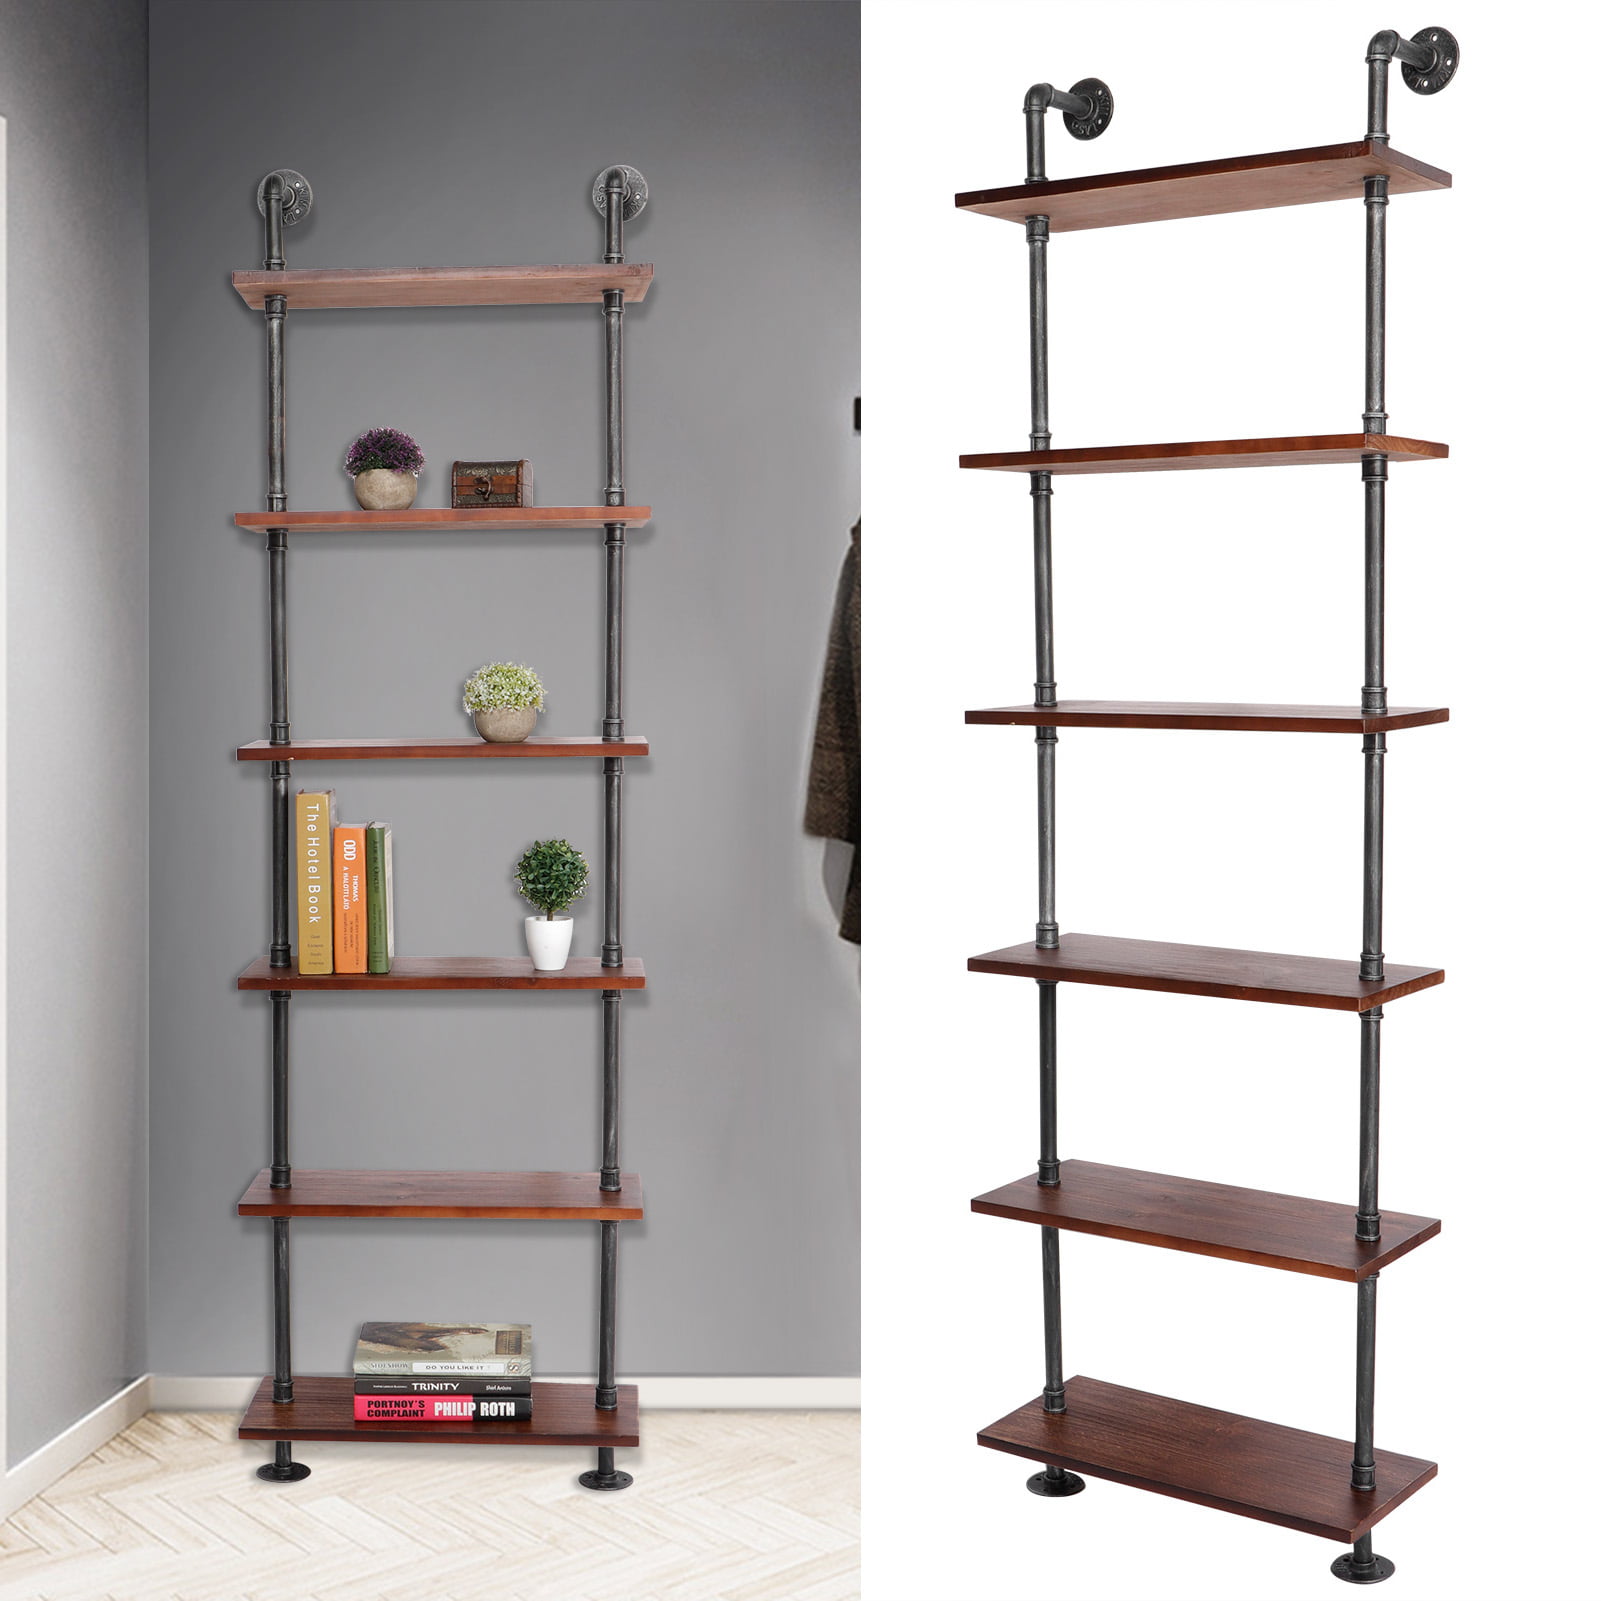 Acouto Wall Mounted Shelves Home, Industrial 6 Shelf Iron And Wood Wall Bookcase